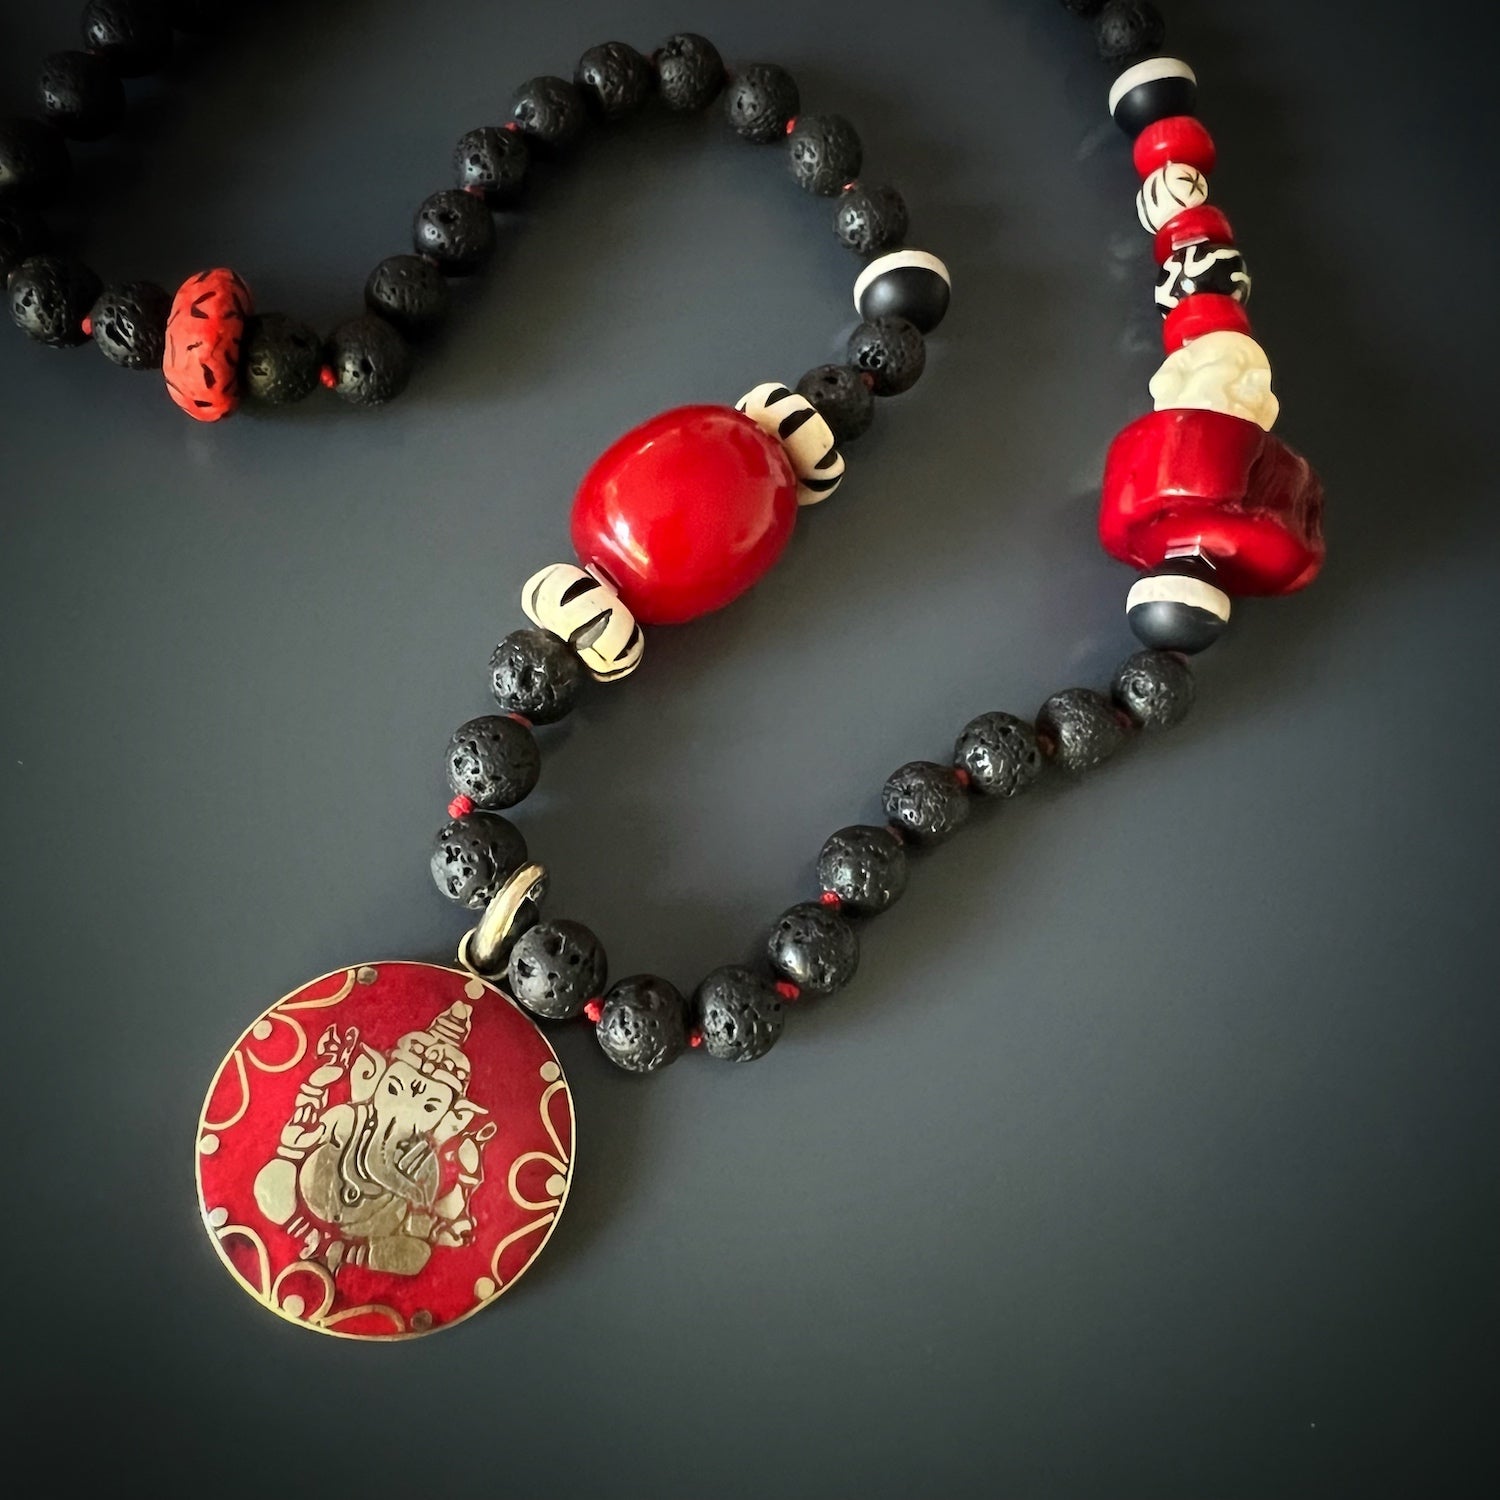 Unique Handmade Yoga Necklace with Ganesha and Coral Stones